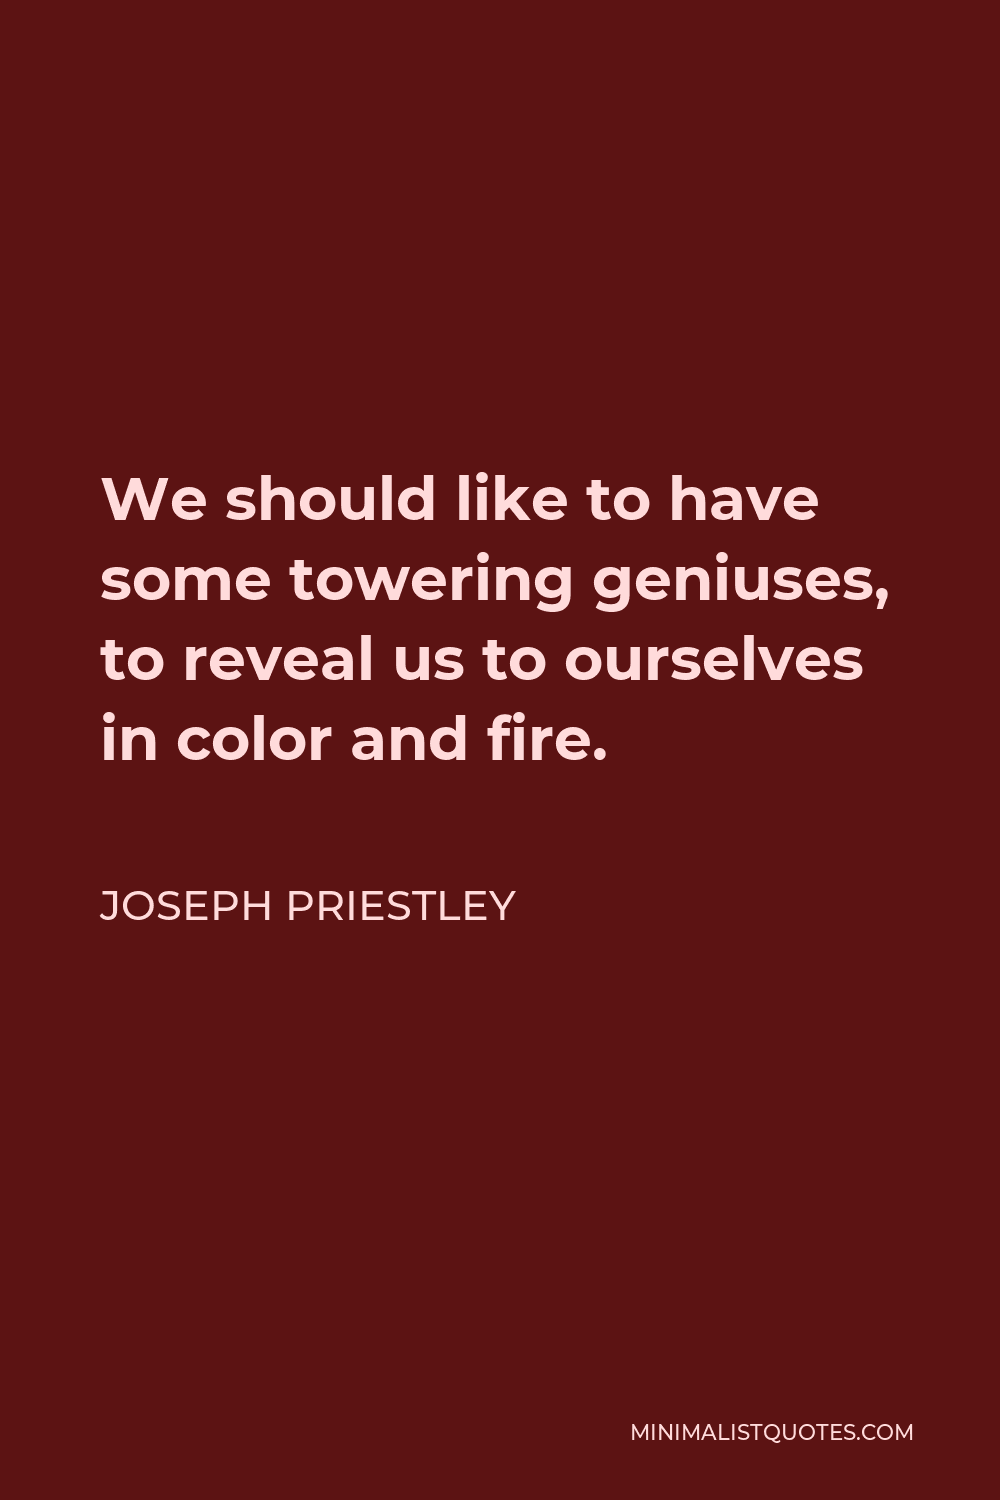 Joseph Priestley Quote - We should like to have some towering geniuses, to reveal us to ourselves in color and fire.